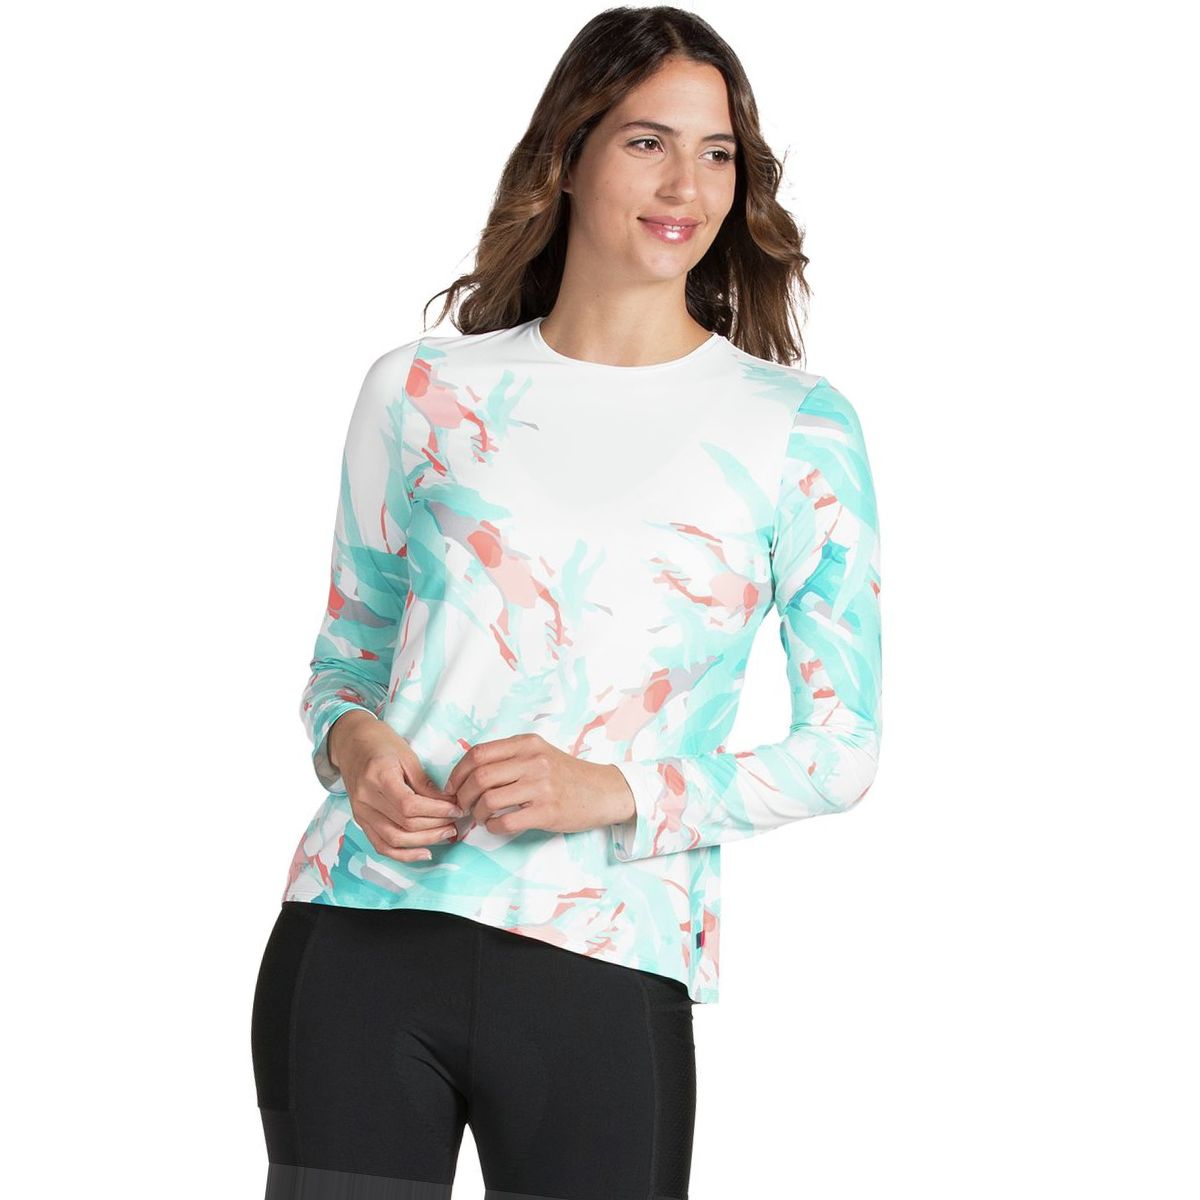 Terry Bicycles Soleil Flow Long-Sleeve Jersey - Women's